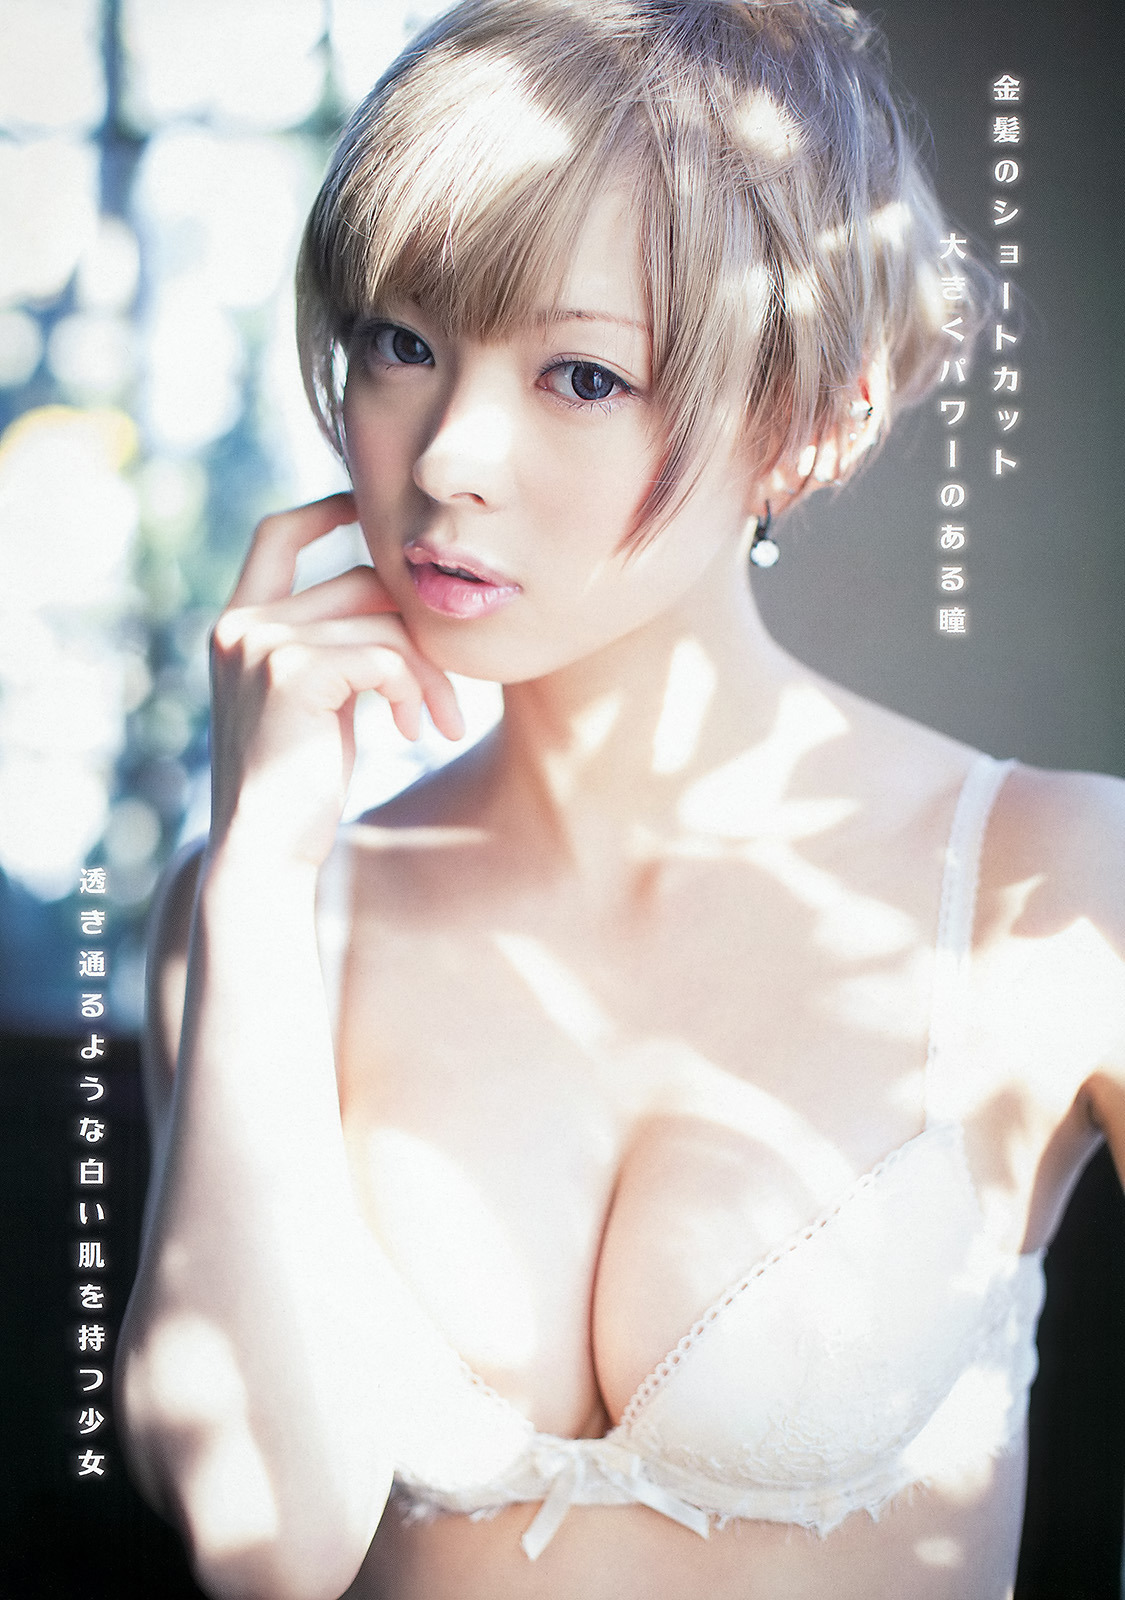 gravure-glamour:  Moga Mogami, from Young Animal